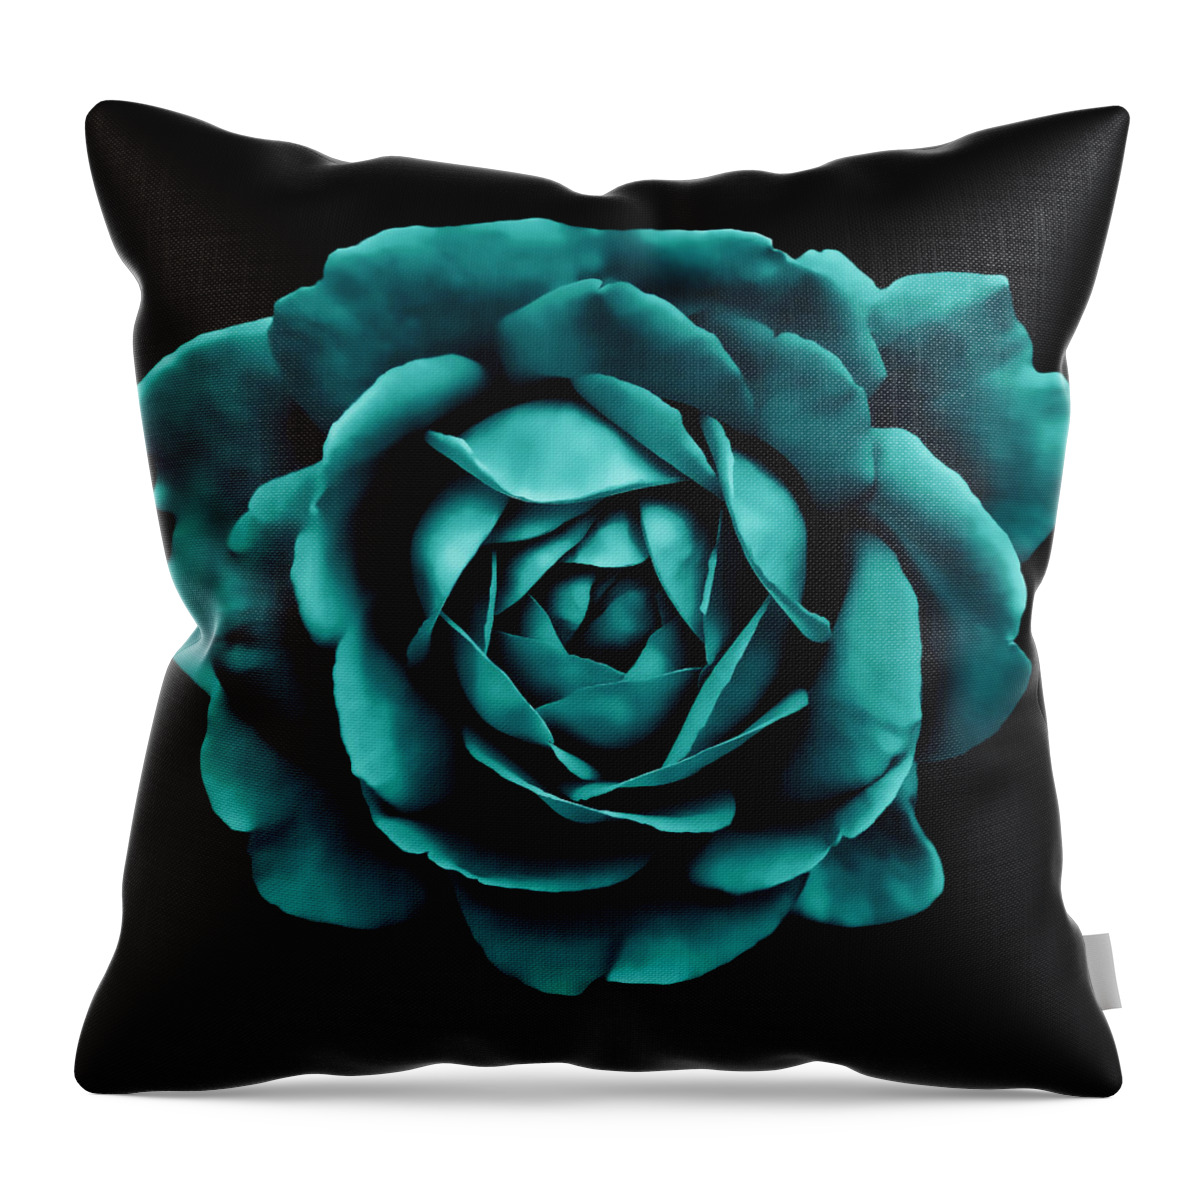 Rose Throw Pillow featuring the photograph Dramatic Teal Green Rose Portrait by Jennie Marie Schell